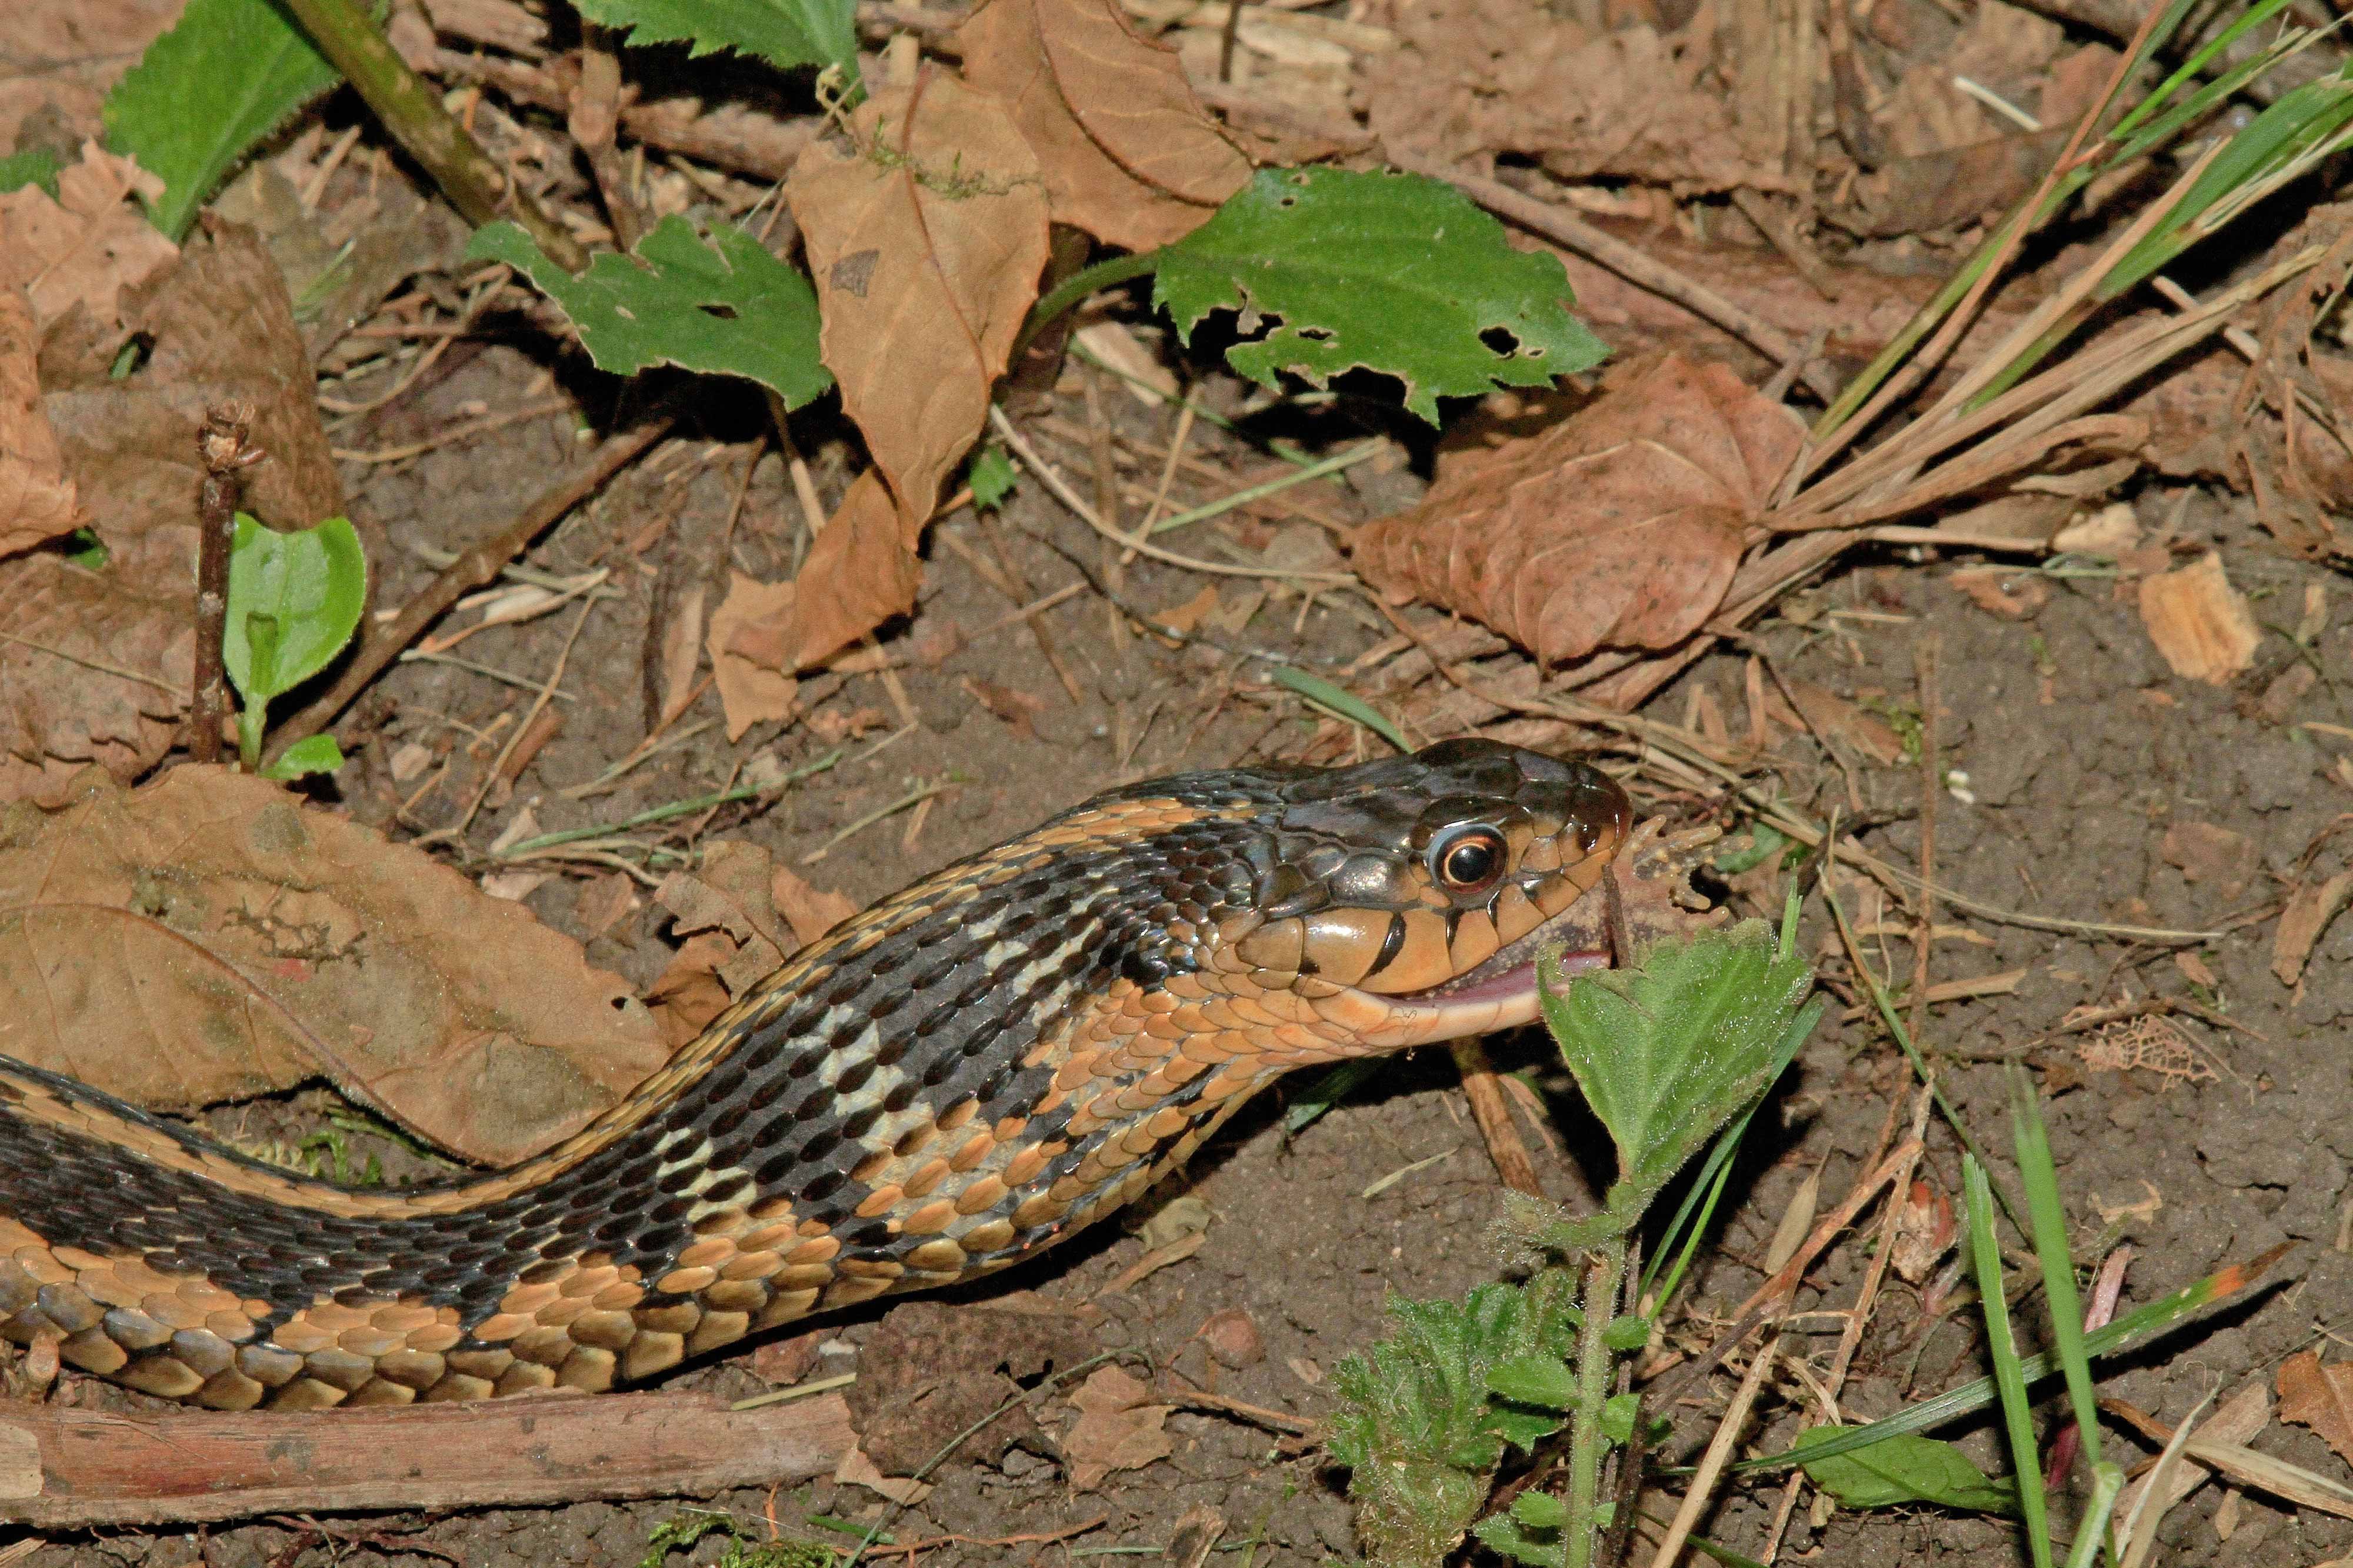 Garter snake with its swallowed prey. 